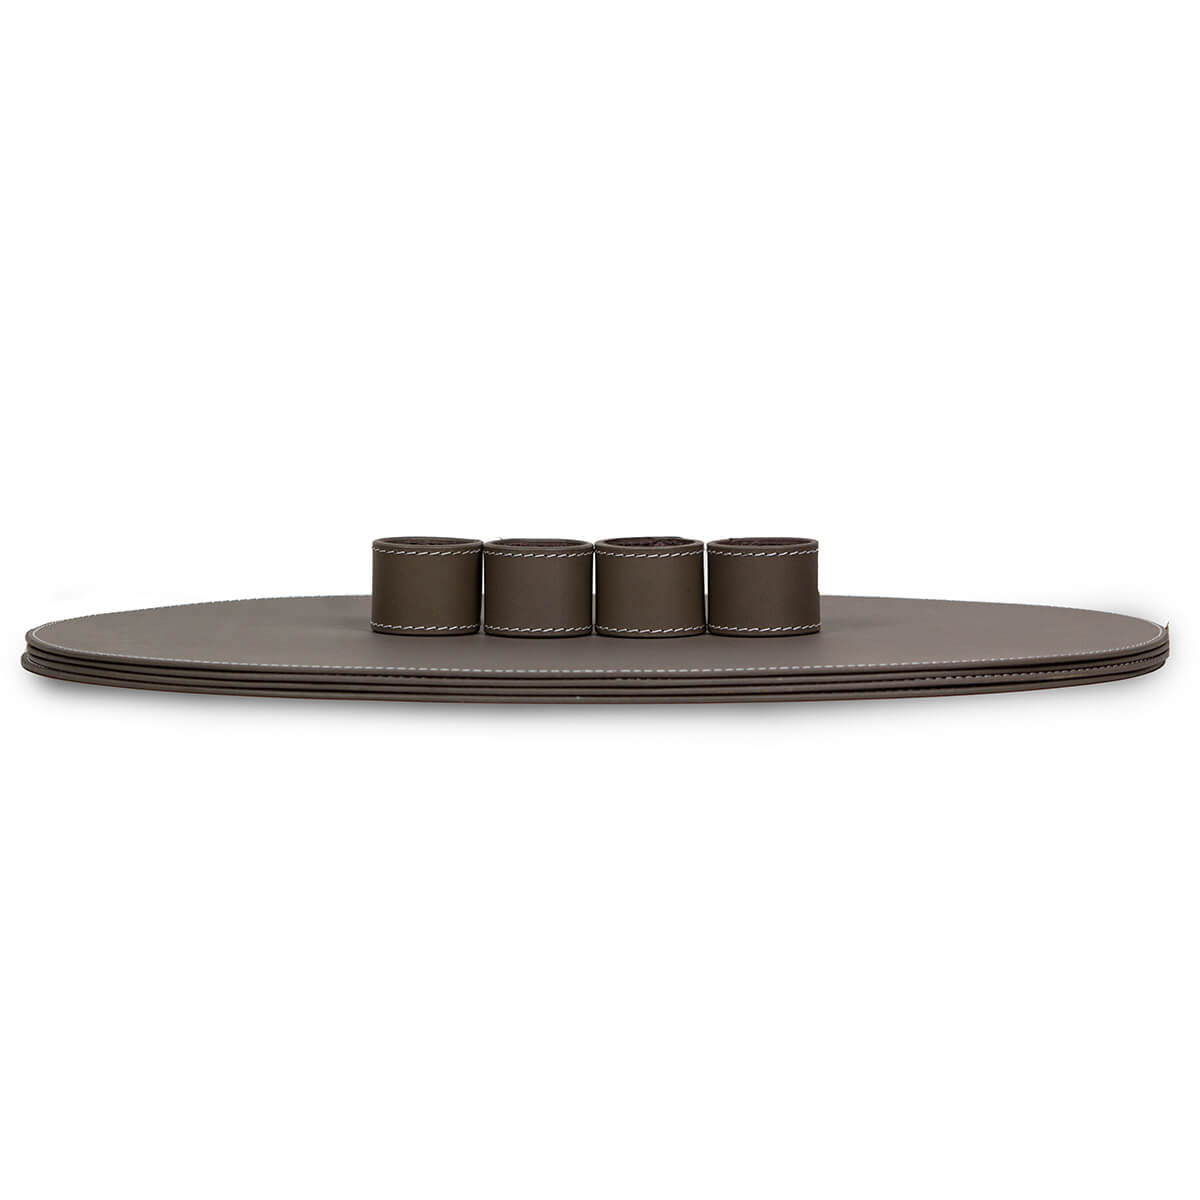 Napkin Holder & Placemats Set Of 4 Taupe